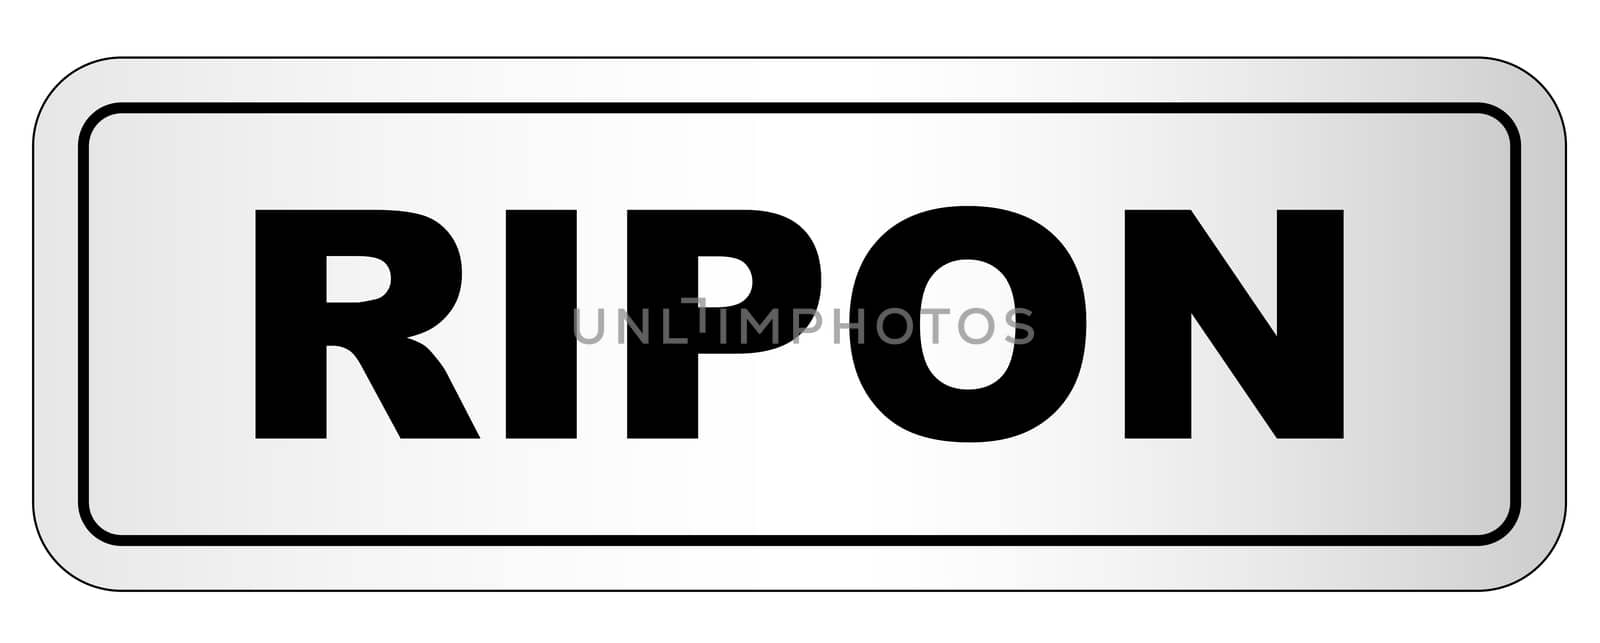 The city of Ripon nameplate on a white background